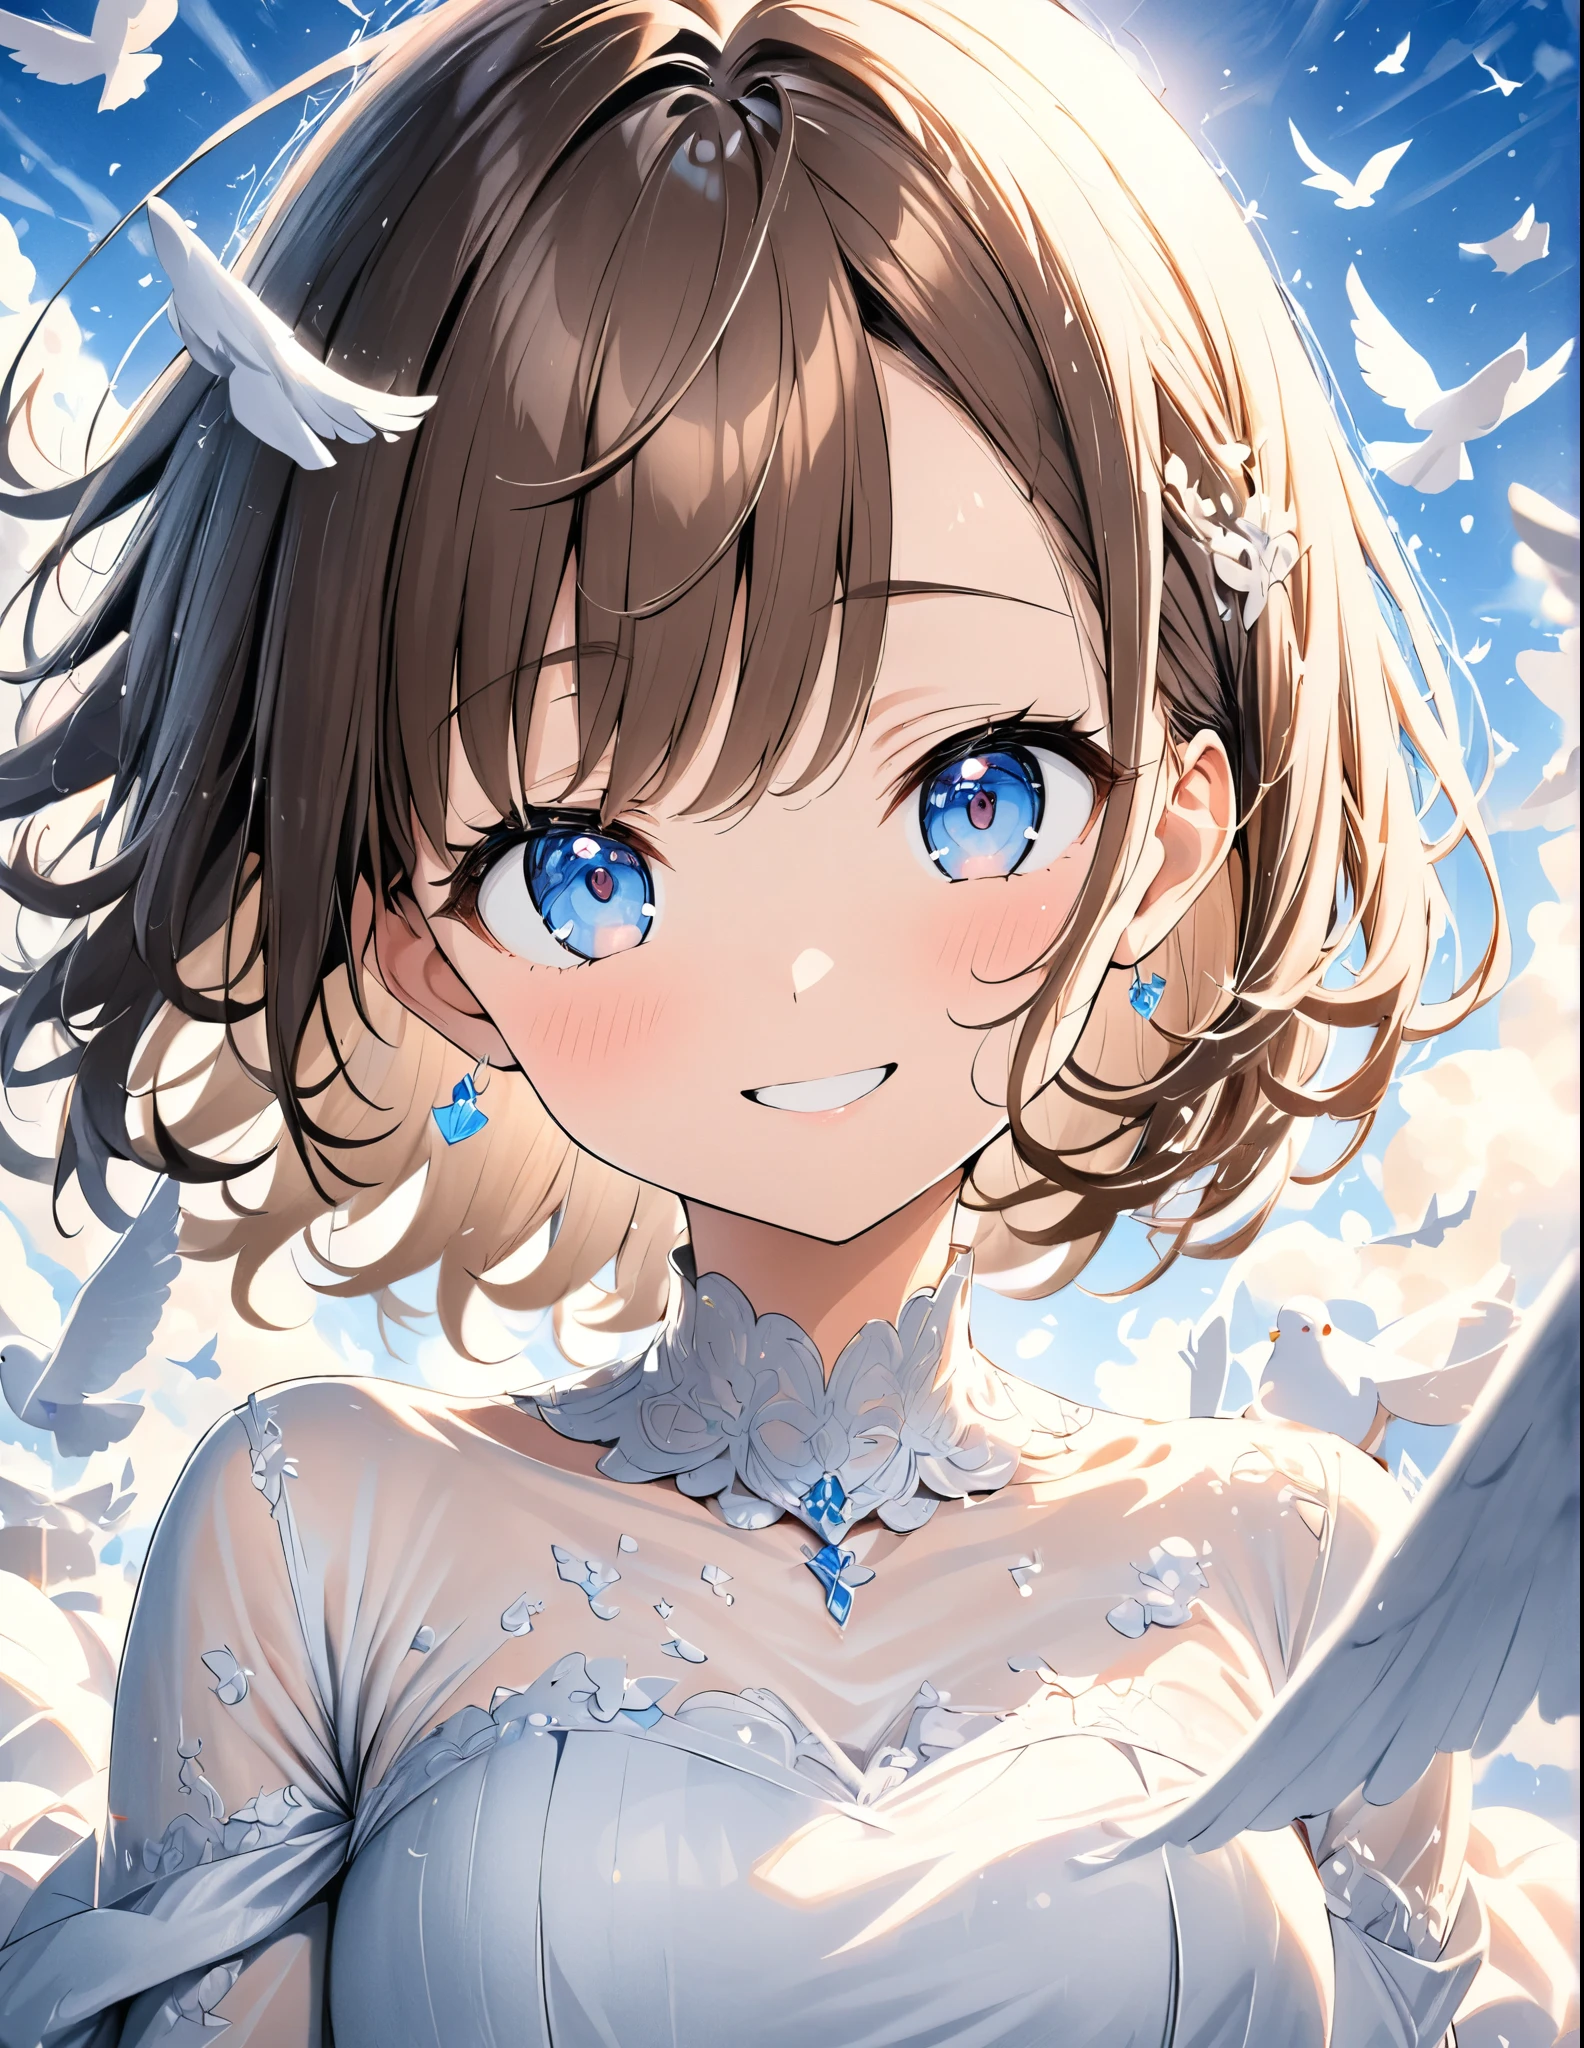 ((style:Colored pencil,pale colour))、(anime)、(masterpiece:1.2),atmospheric perspective,lens flare、White world。Light color、Wedding dress、Brown Hair、Droopy eyes、cute、Backlight、Smile、Under the clear blue sky、Countless white doves fly around、Reflection of light、Mysterious Works